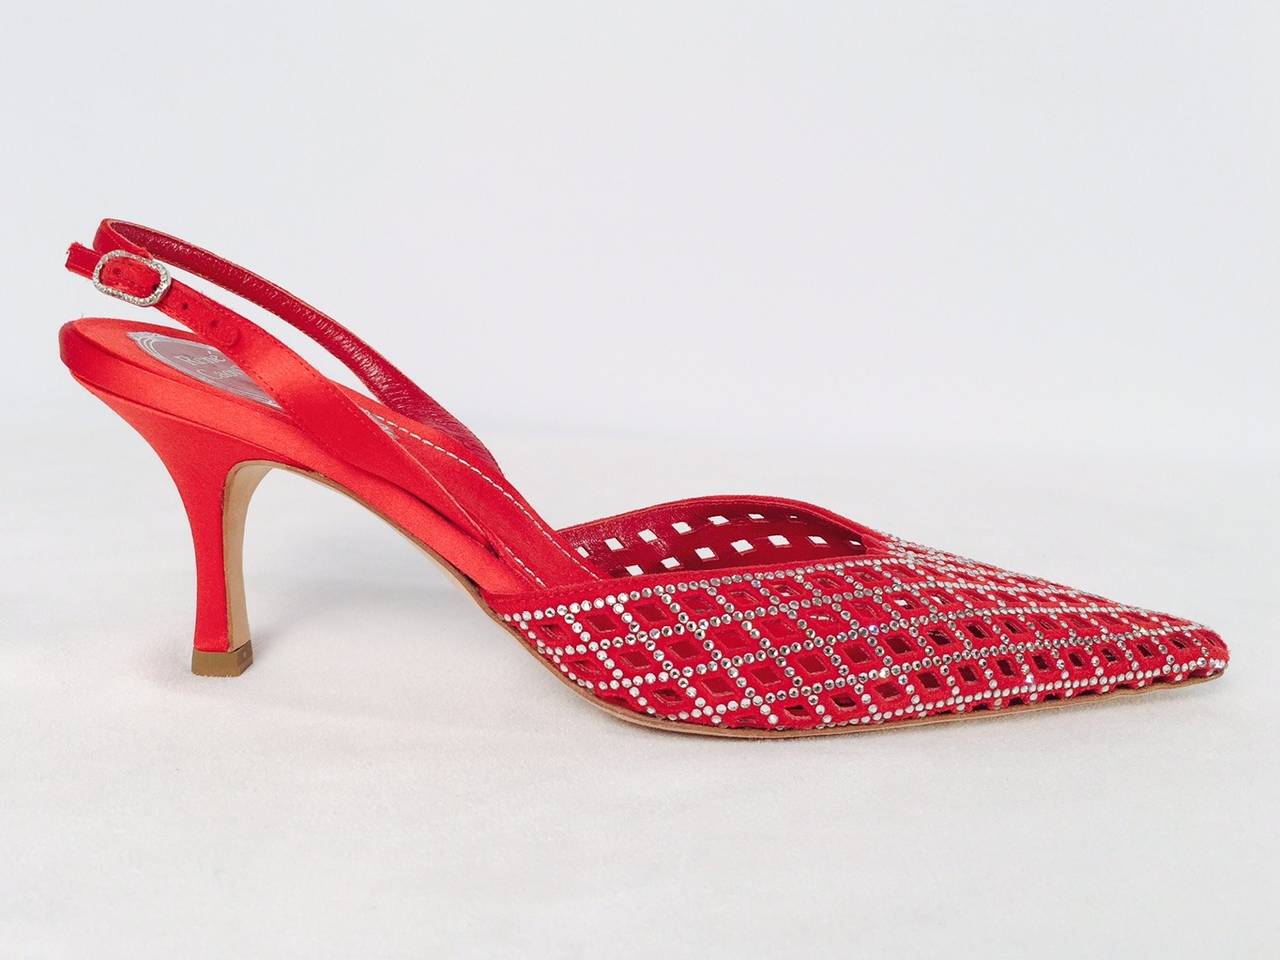 You are no longer in Kansas!  Rene Caovilla Resplendent Red Suede and Satin Evening Shoes are worthy of the 